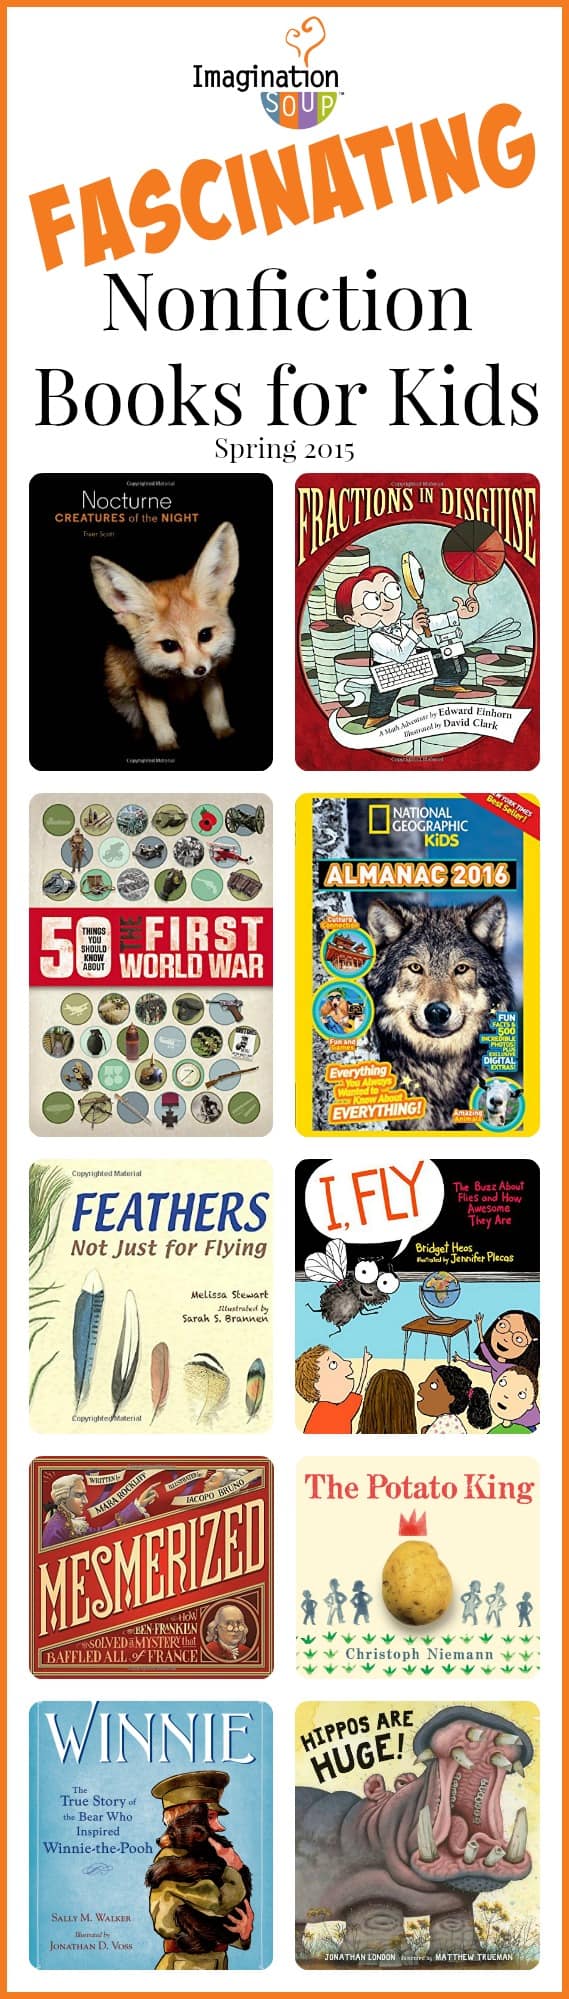 fascinating nonfiction books for kids, spring 2015